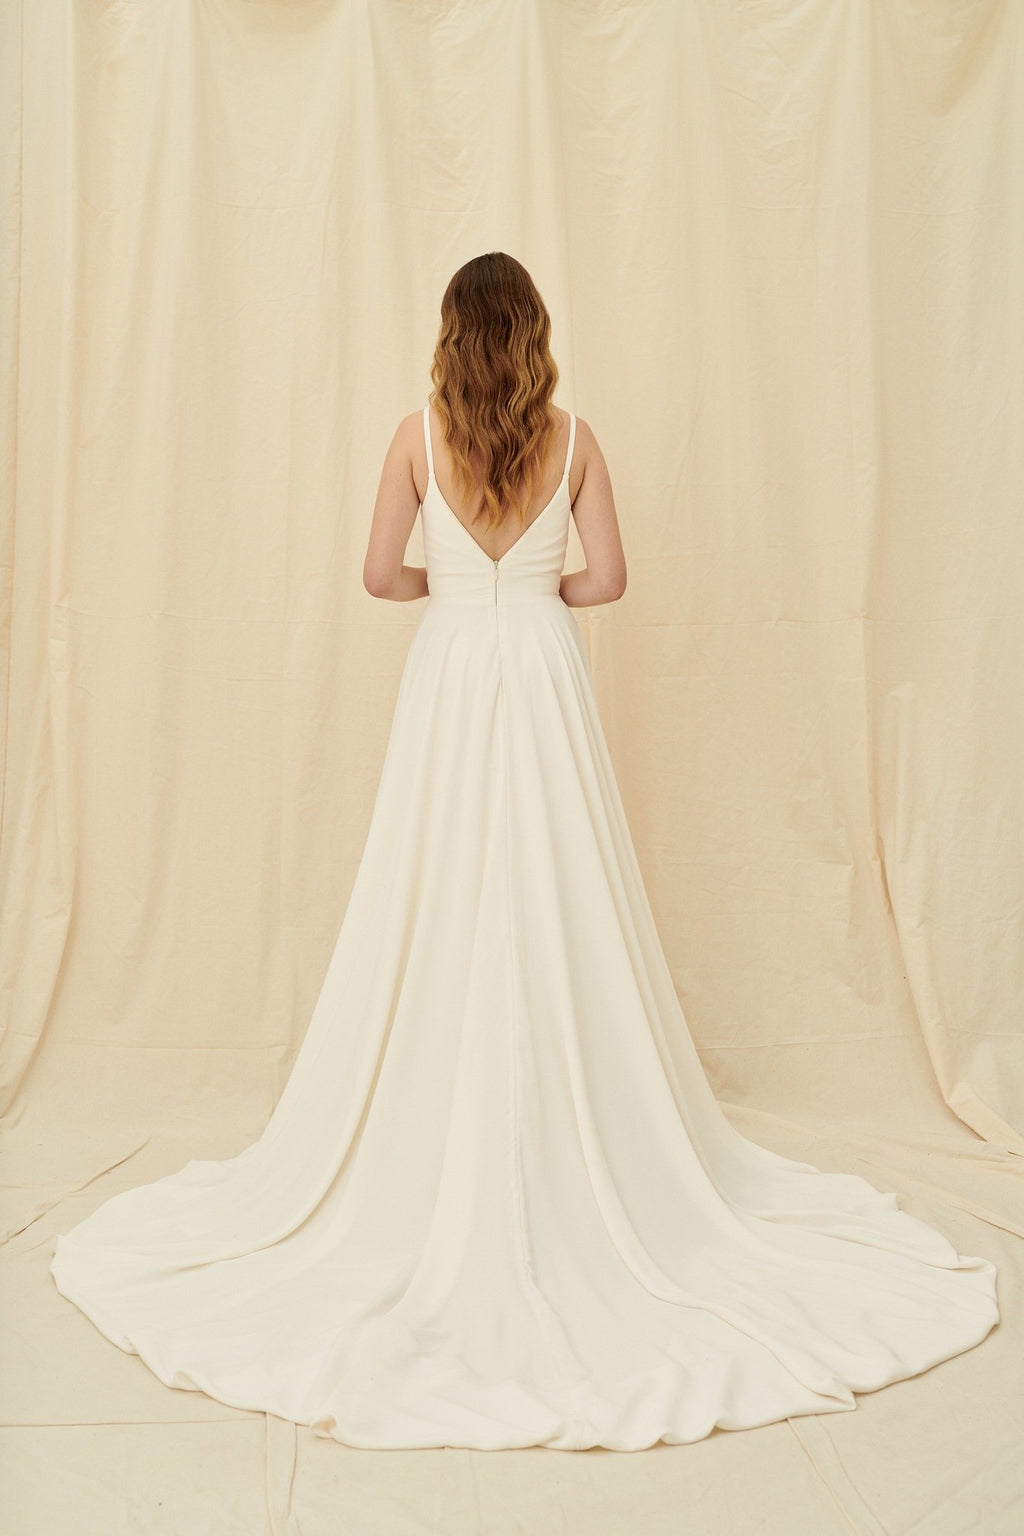 Super low cut crepe wedding dress with spaghetti straps, pockets, and a huge train